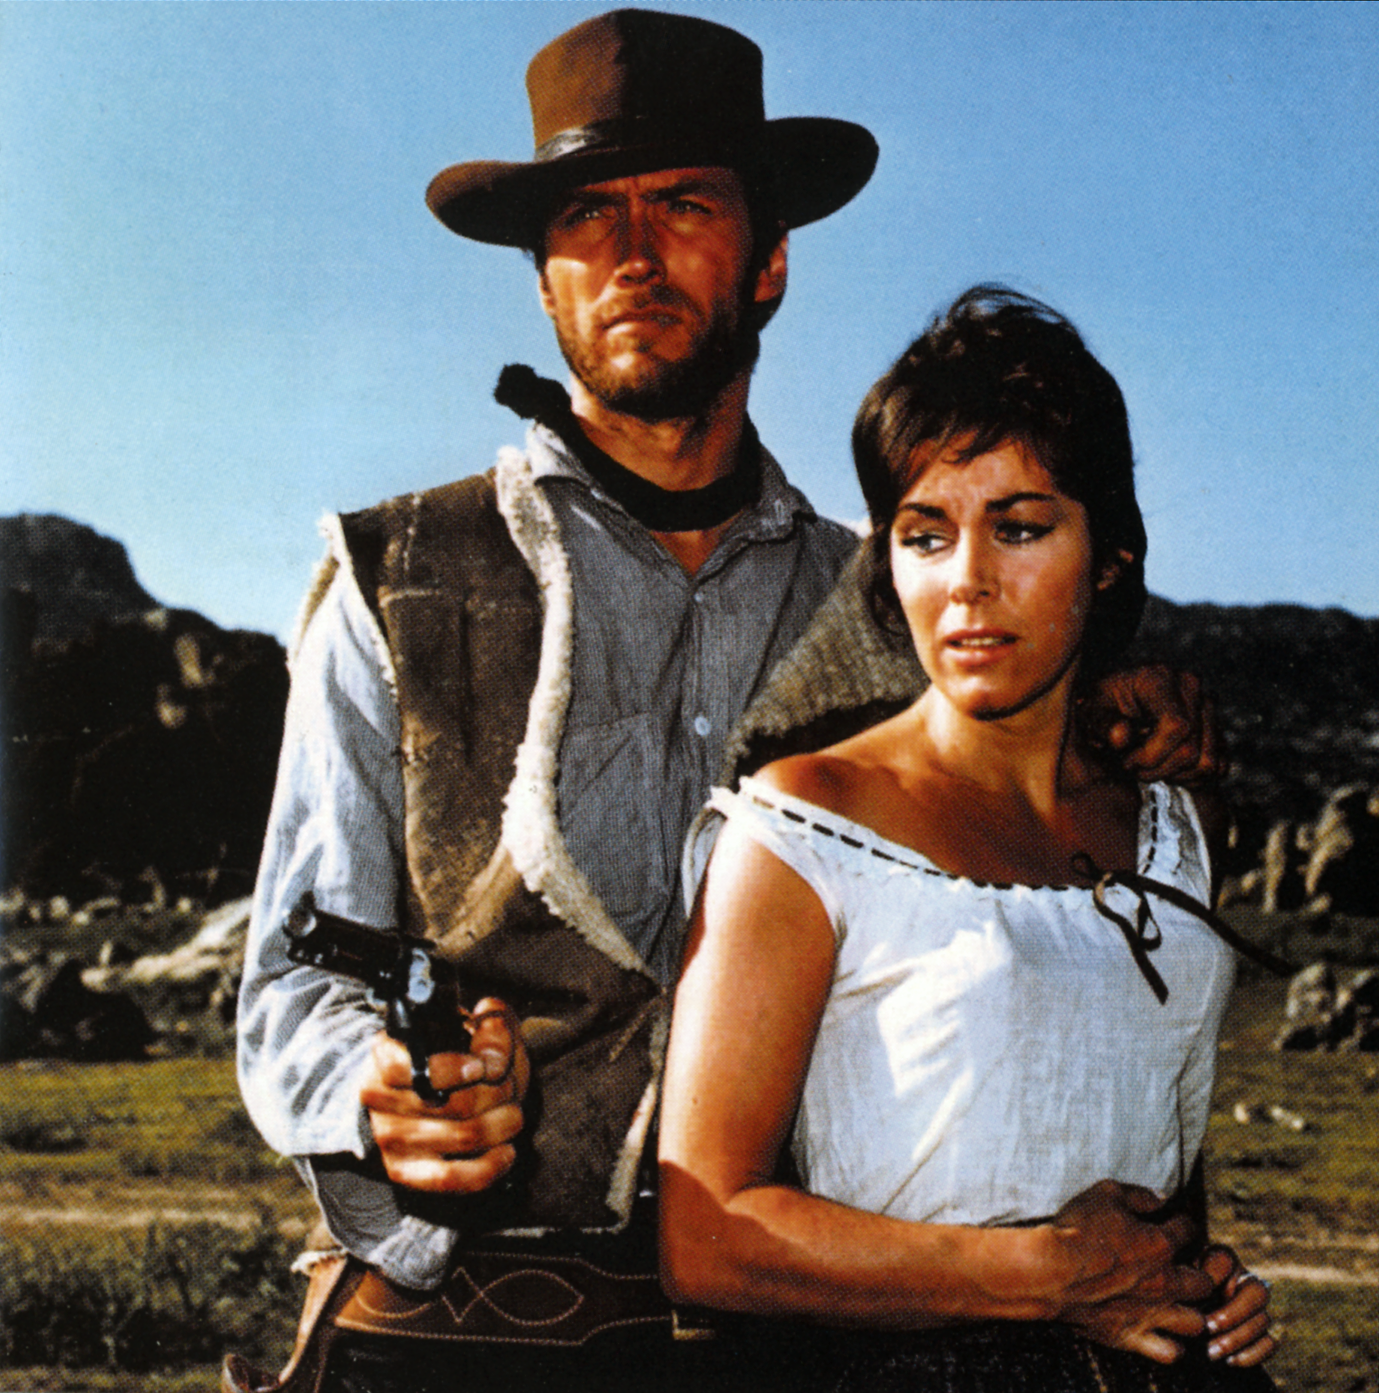 Stick ’em up: Clint Eastwood and Marianne Koch in ‘A Fistful of Dollars’